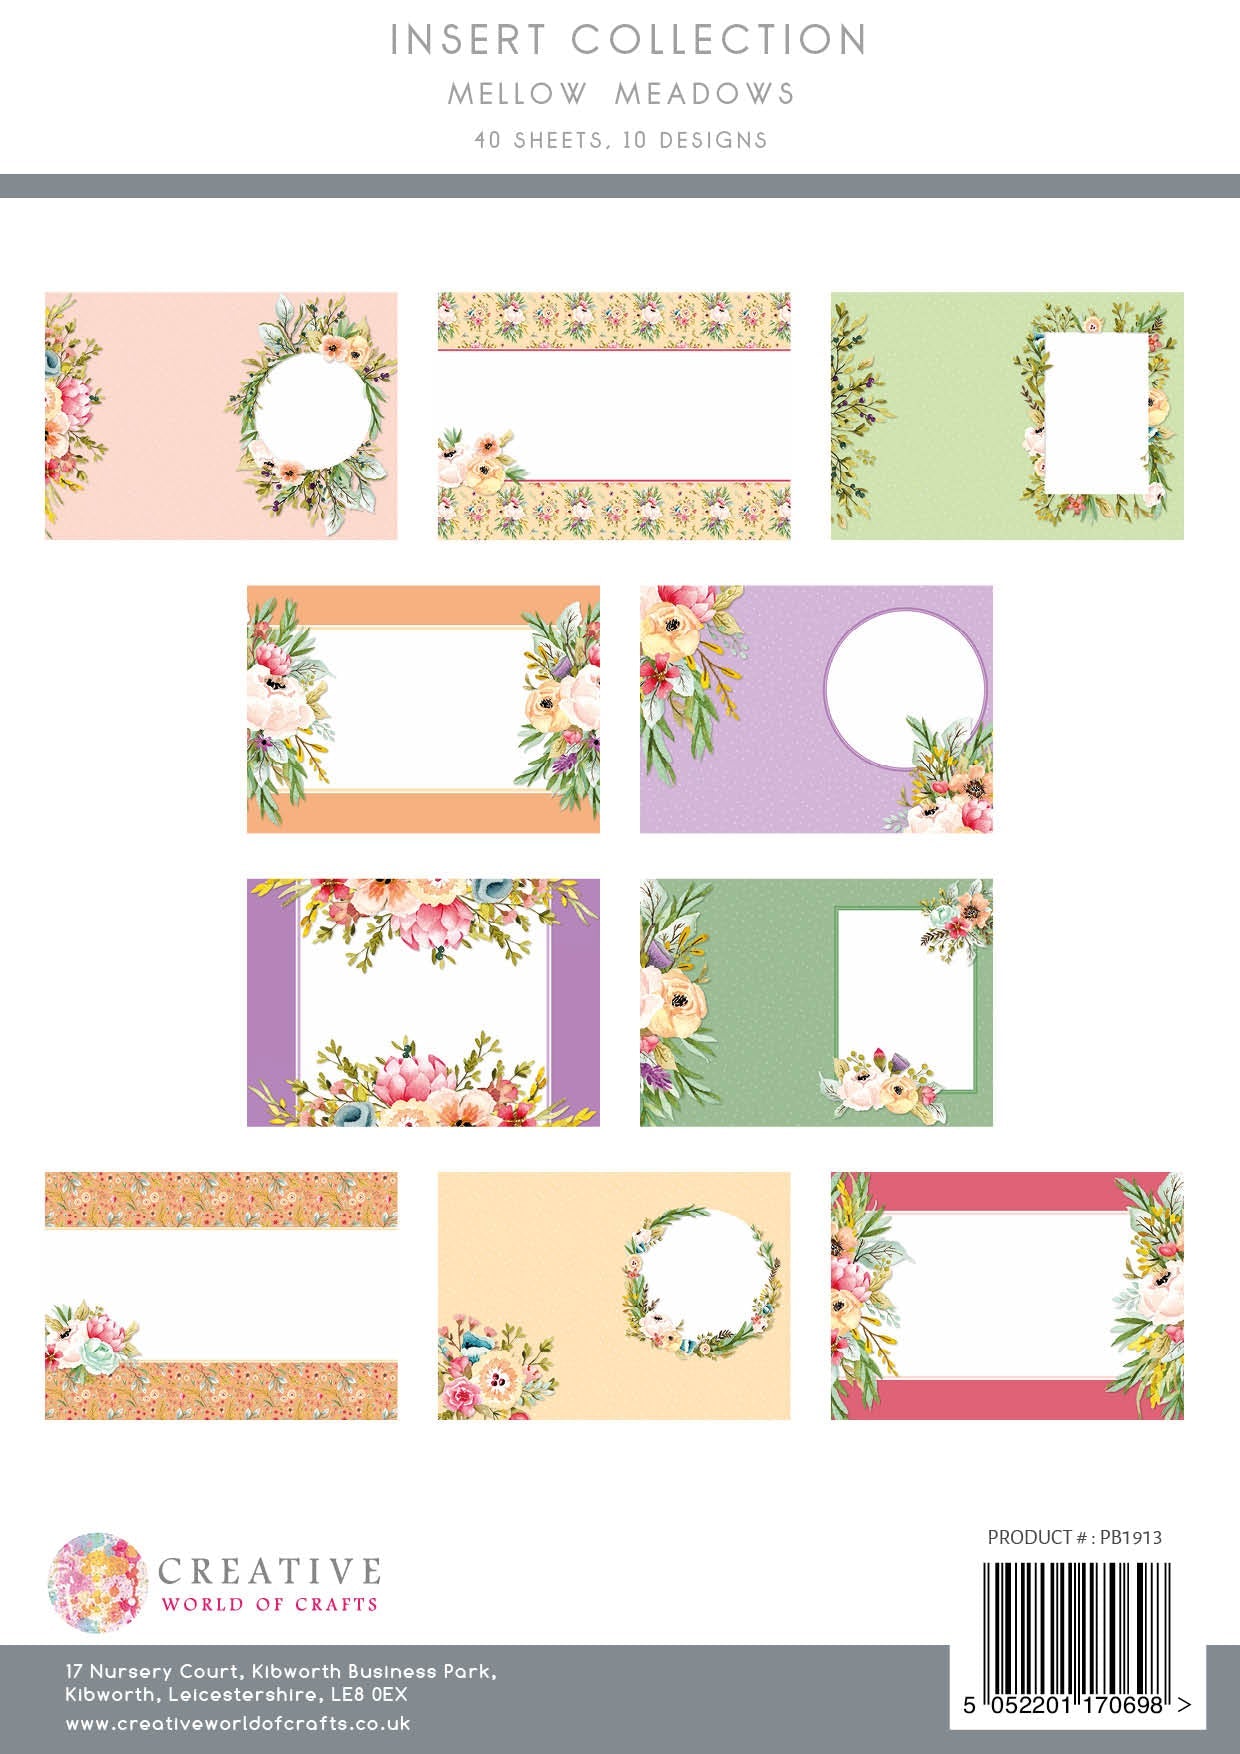 The Paper Boutique Mellow Meadows Insert Collection